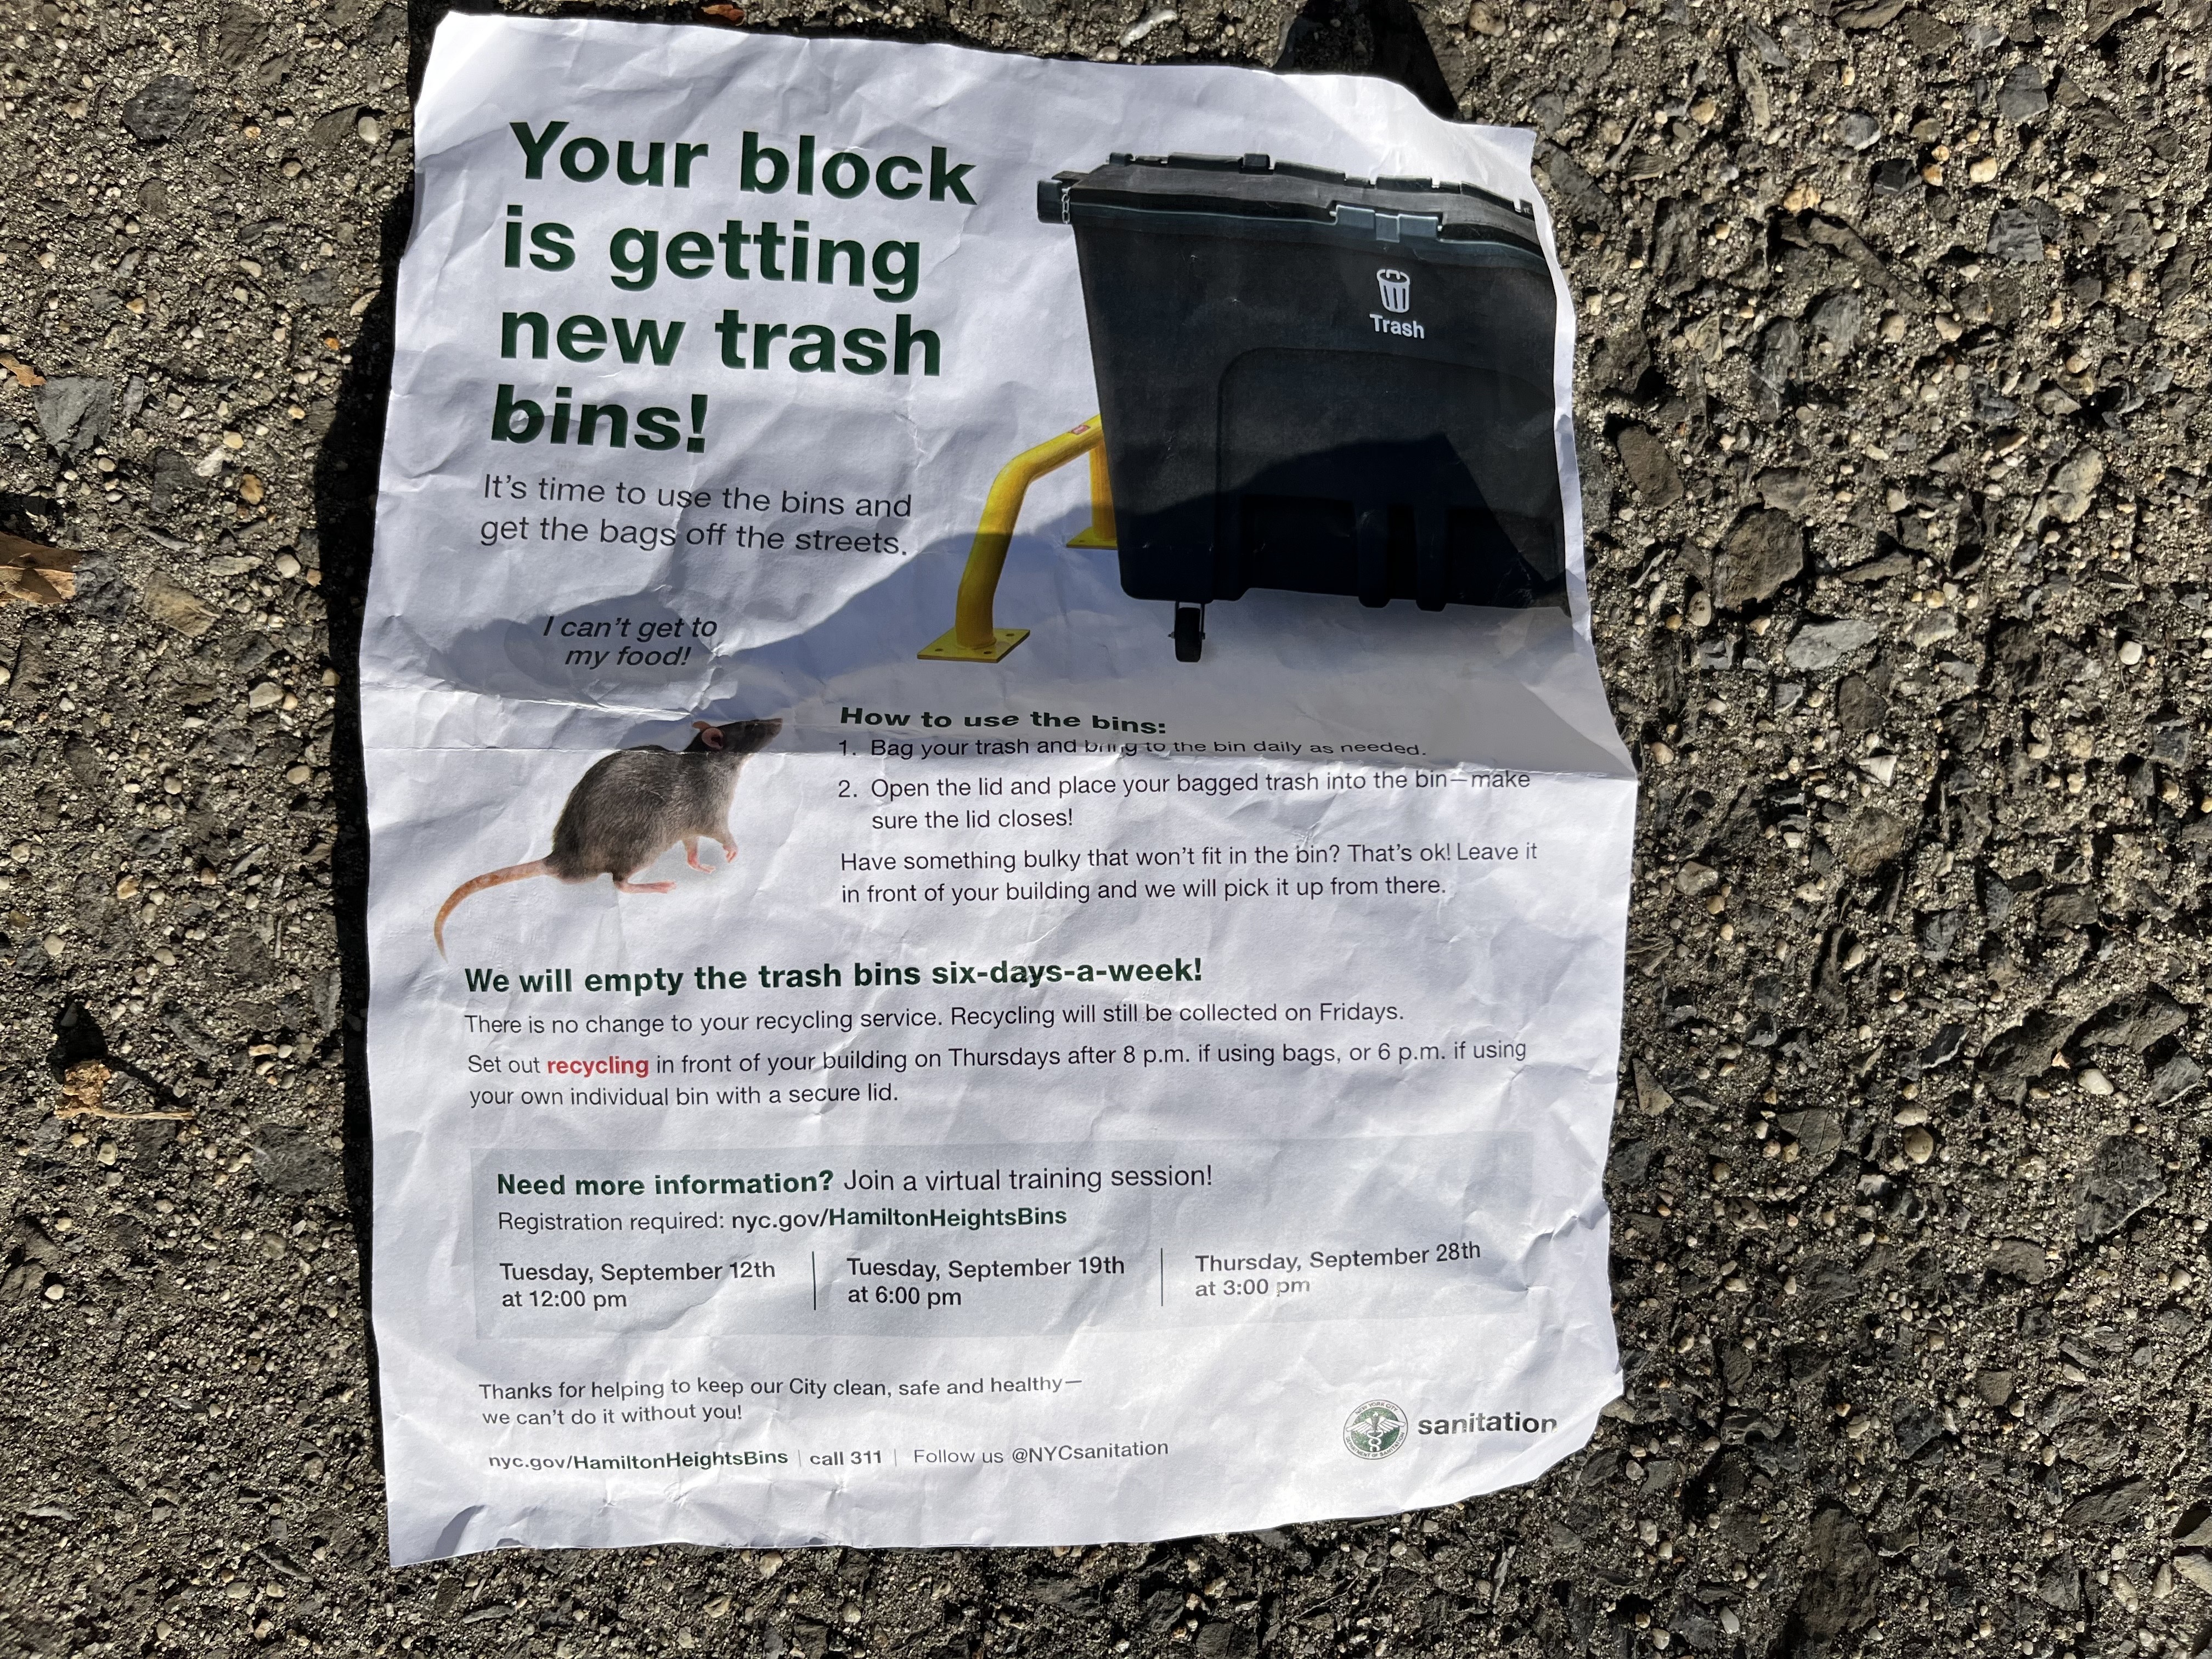 City looks at trash timing in fight against rats